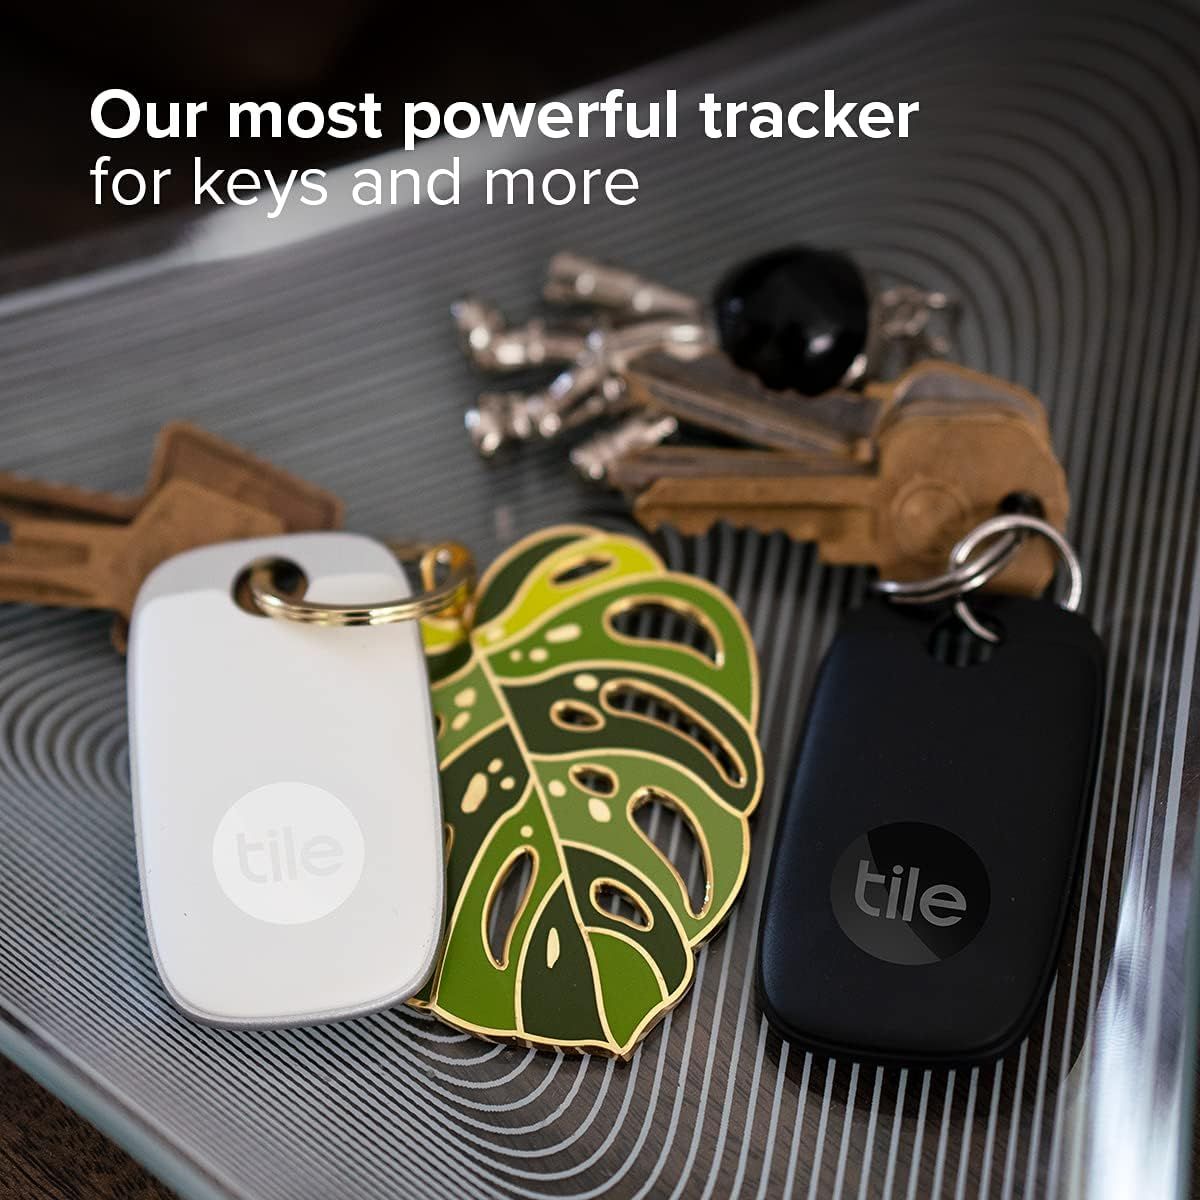 Tile Pro 1-pack. Powerful Bluetooth Tracker, Keys Finder and Item Locator  for Keys, Bags, and More; Up to 400 ft Range. Water-resistant. Phone  Finder.